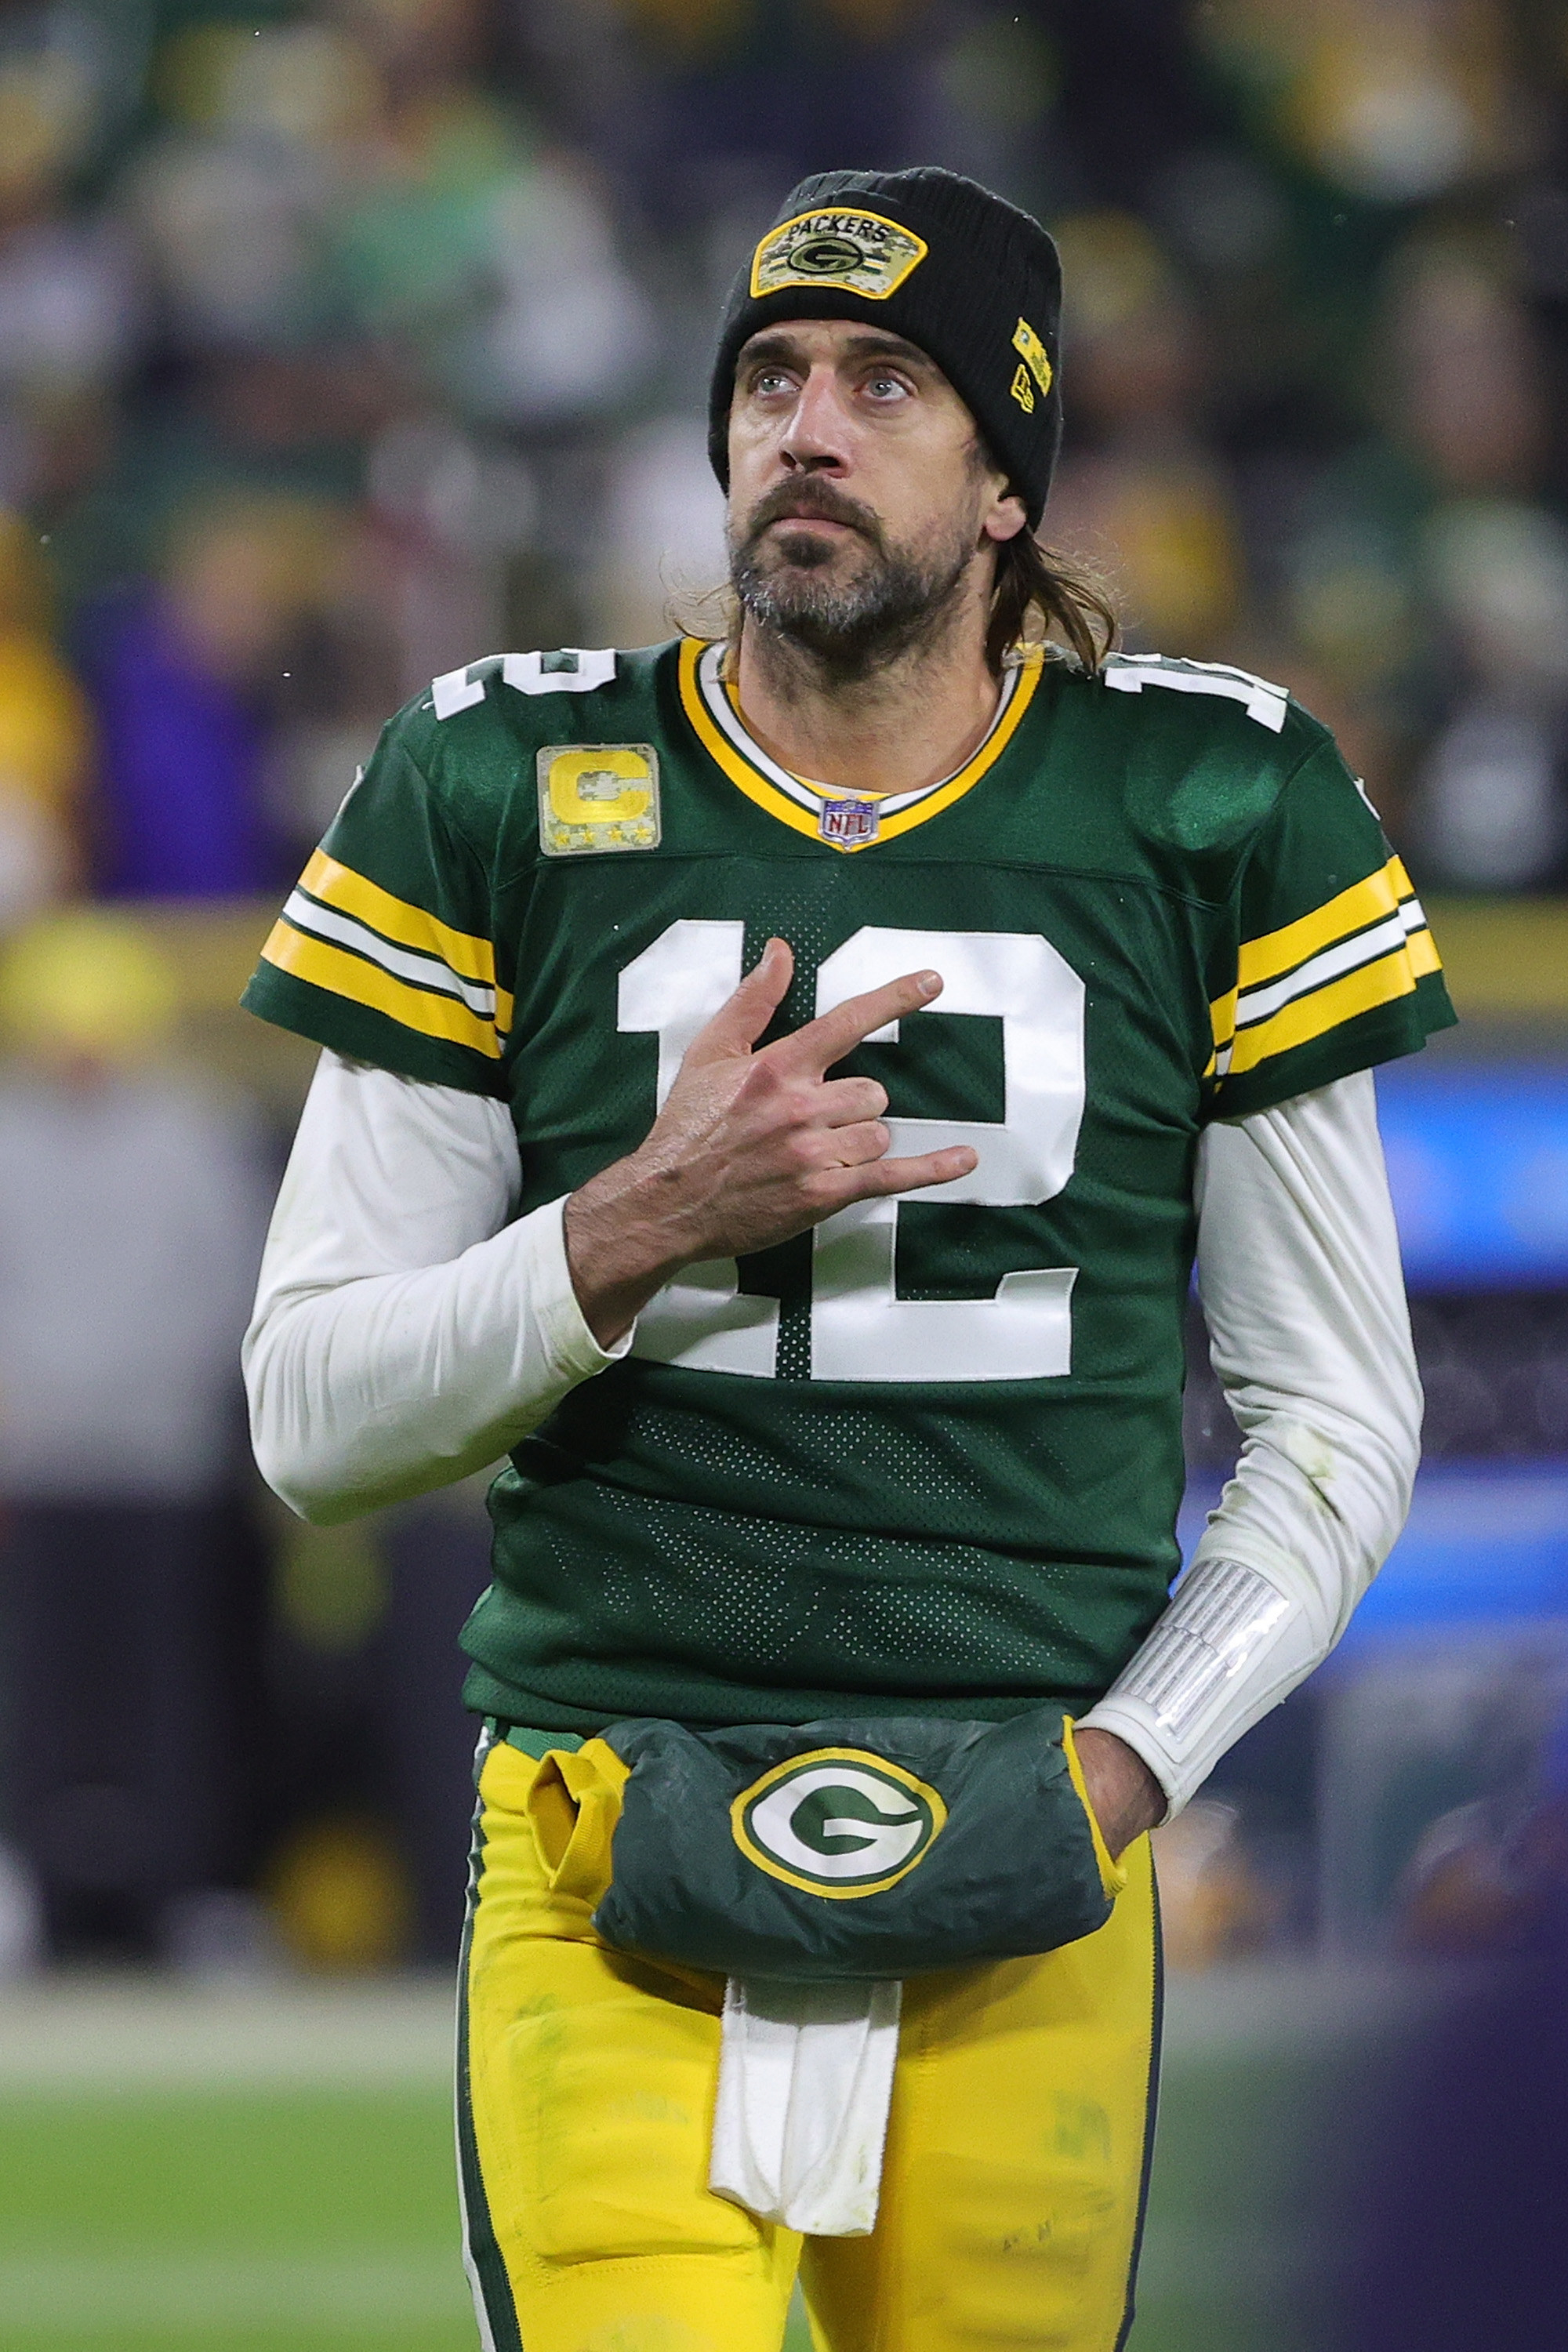 Rodgers makes a hand gesture while walking on the field in his uniform